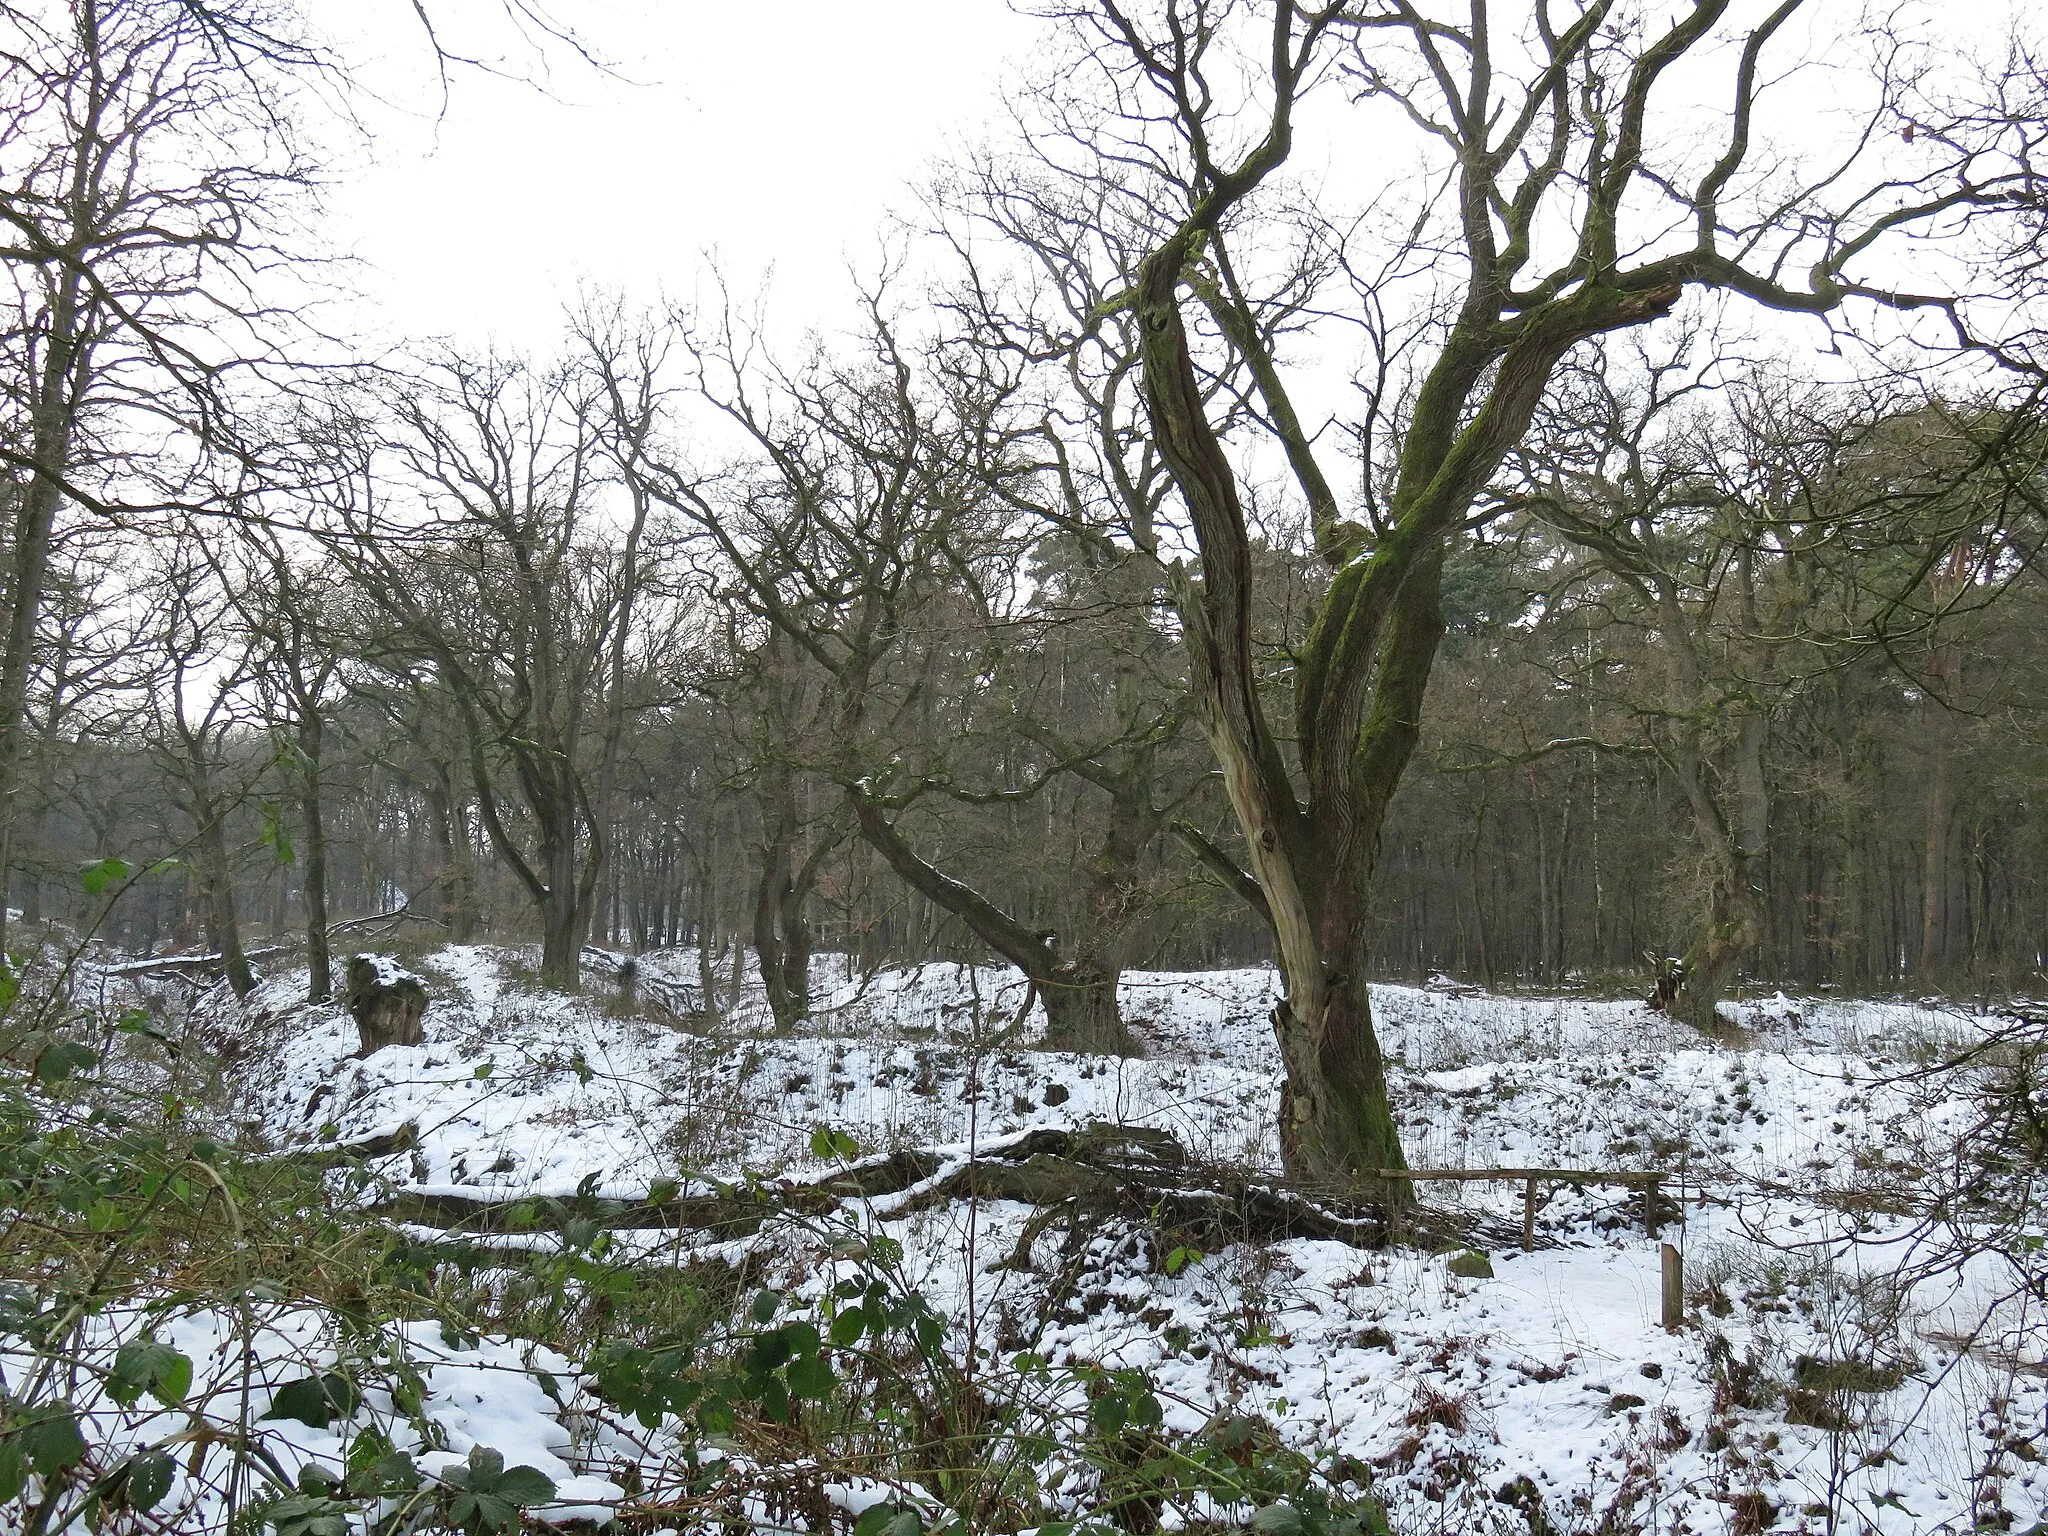 Photo showing: Wodanseiken of Wolfheze (NL), Group of five old oaks of about 450-500 years